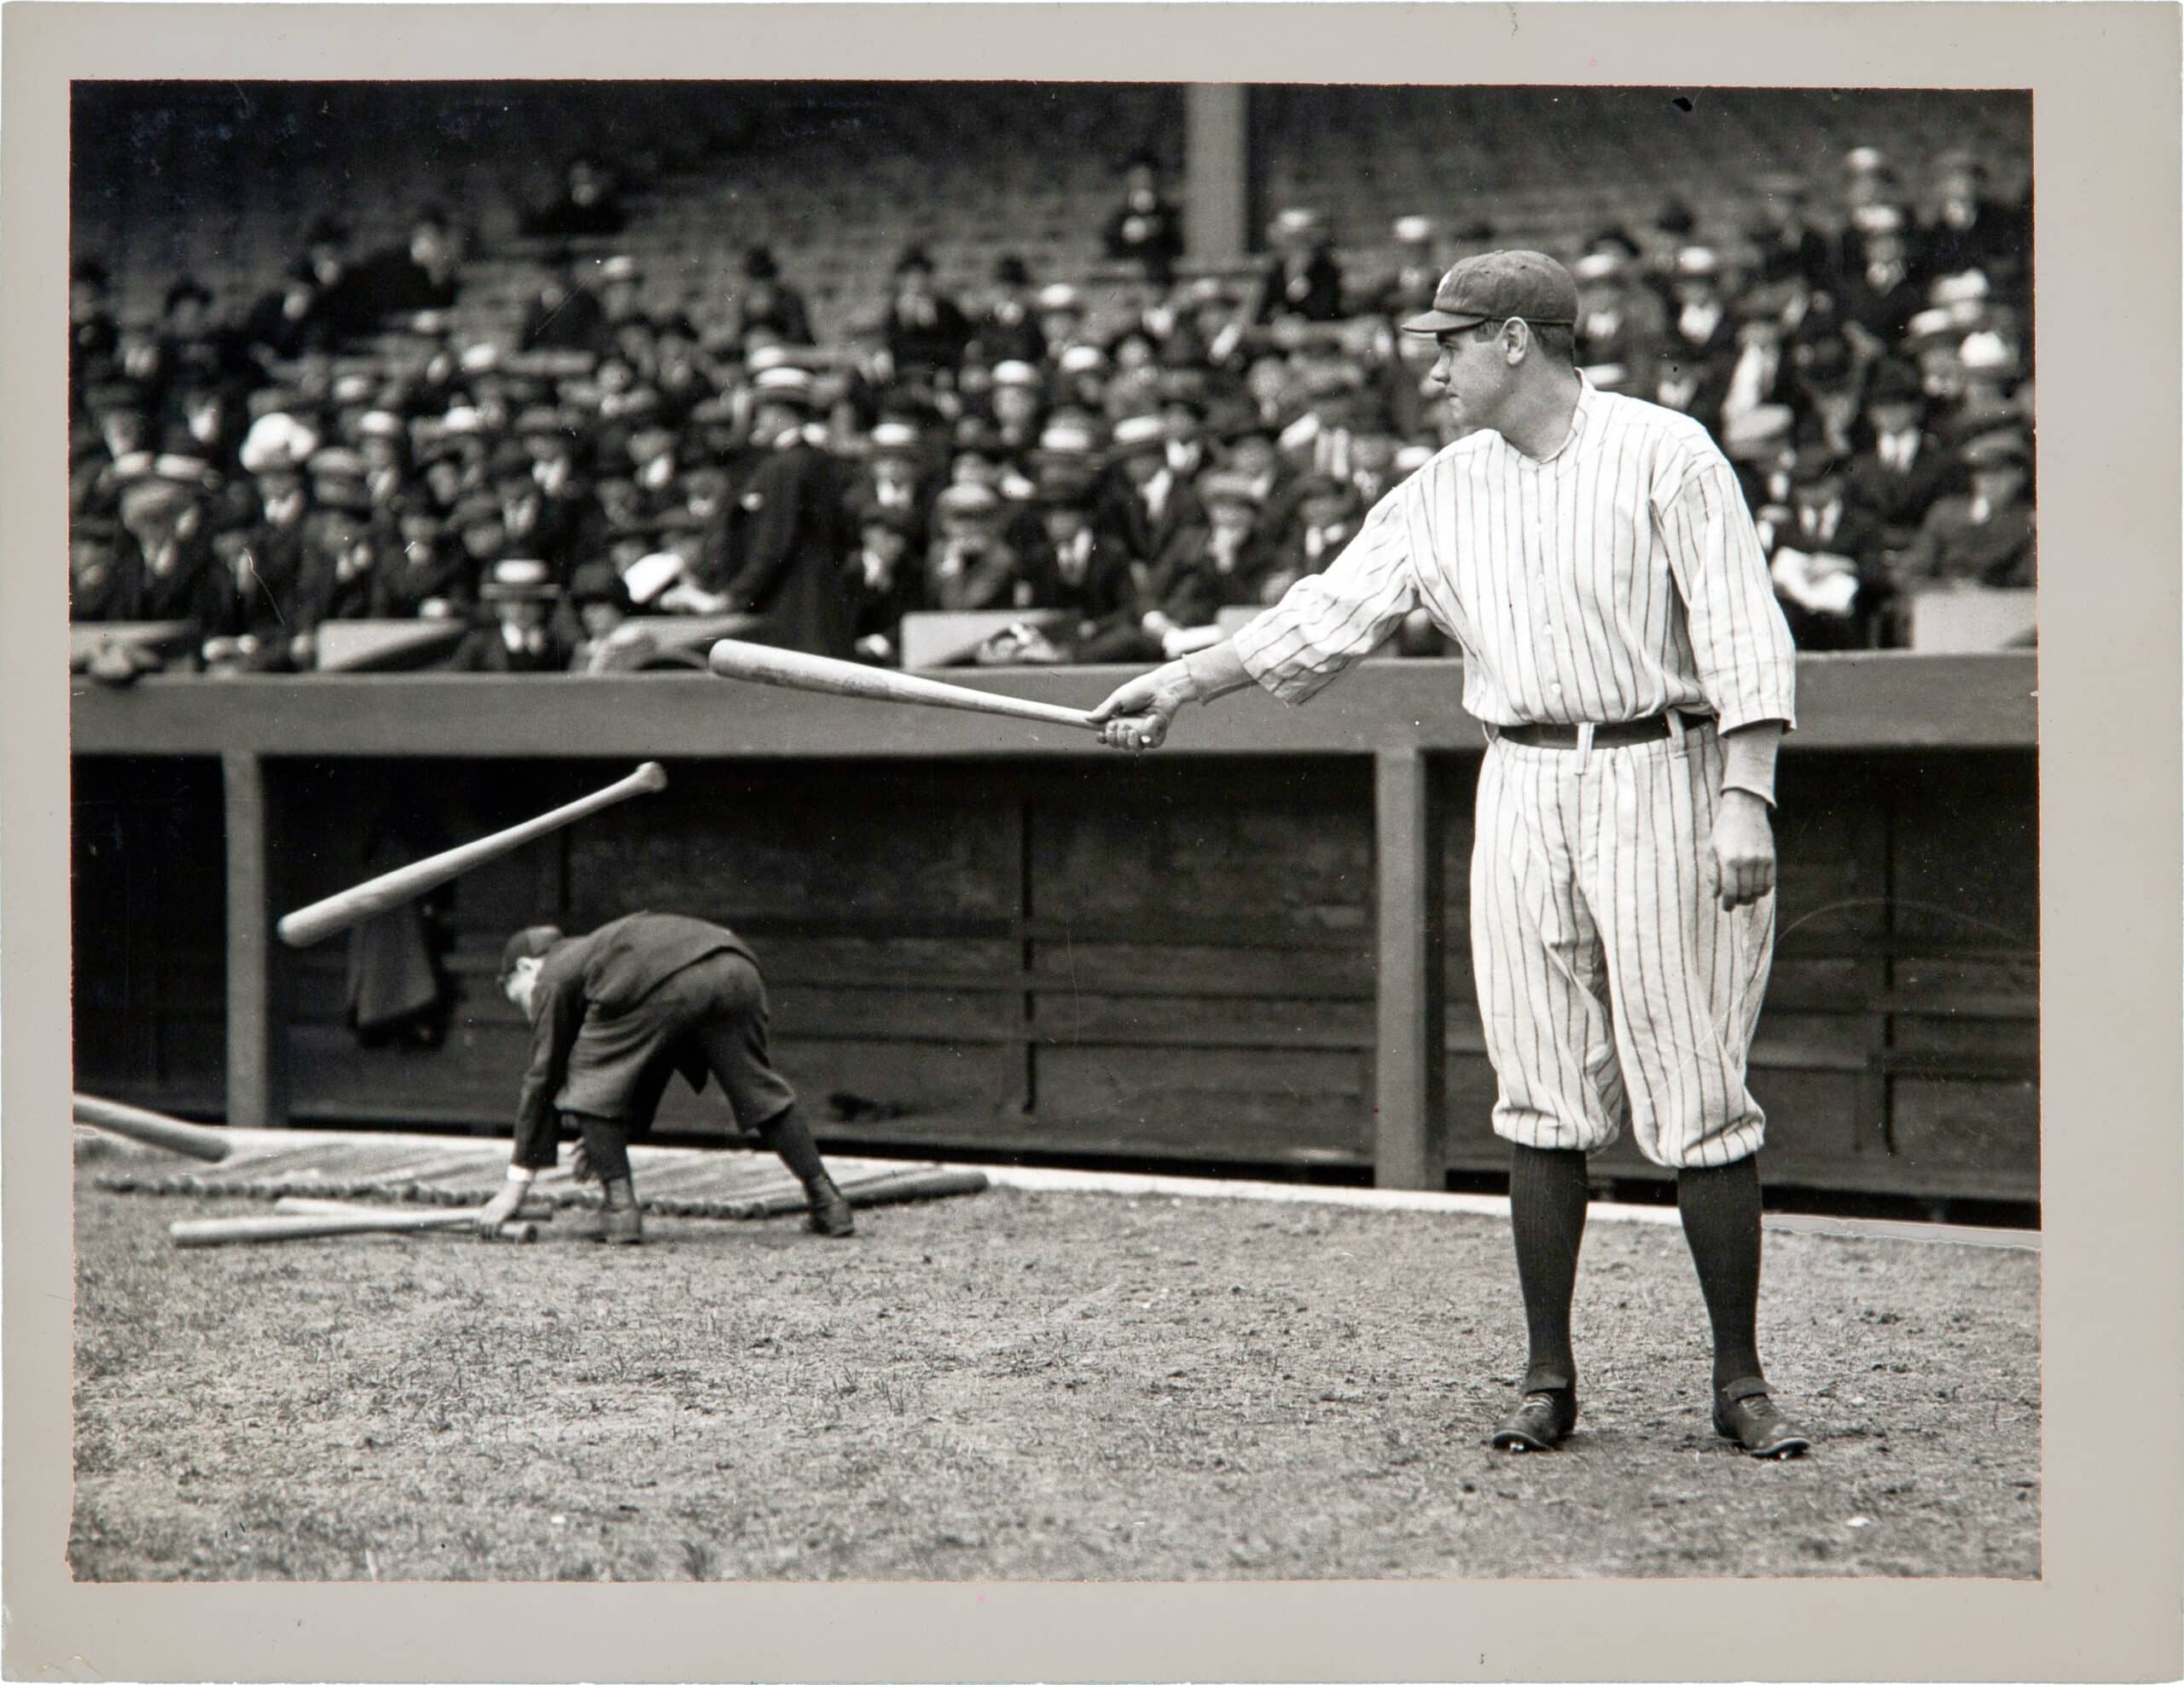 Babe Ruth in 1921